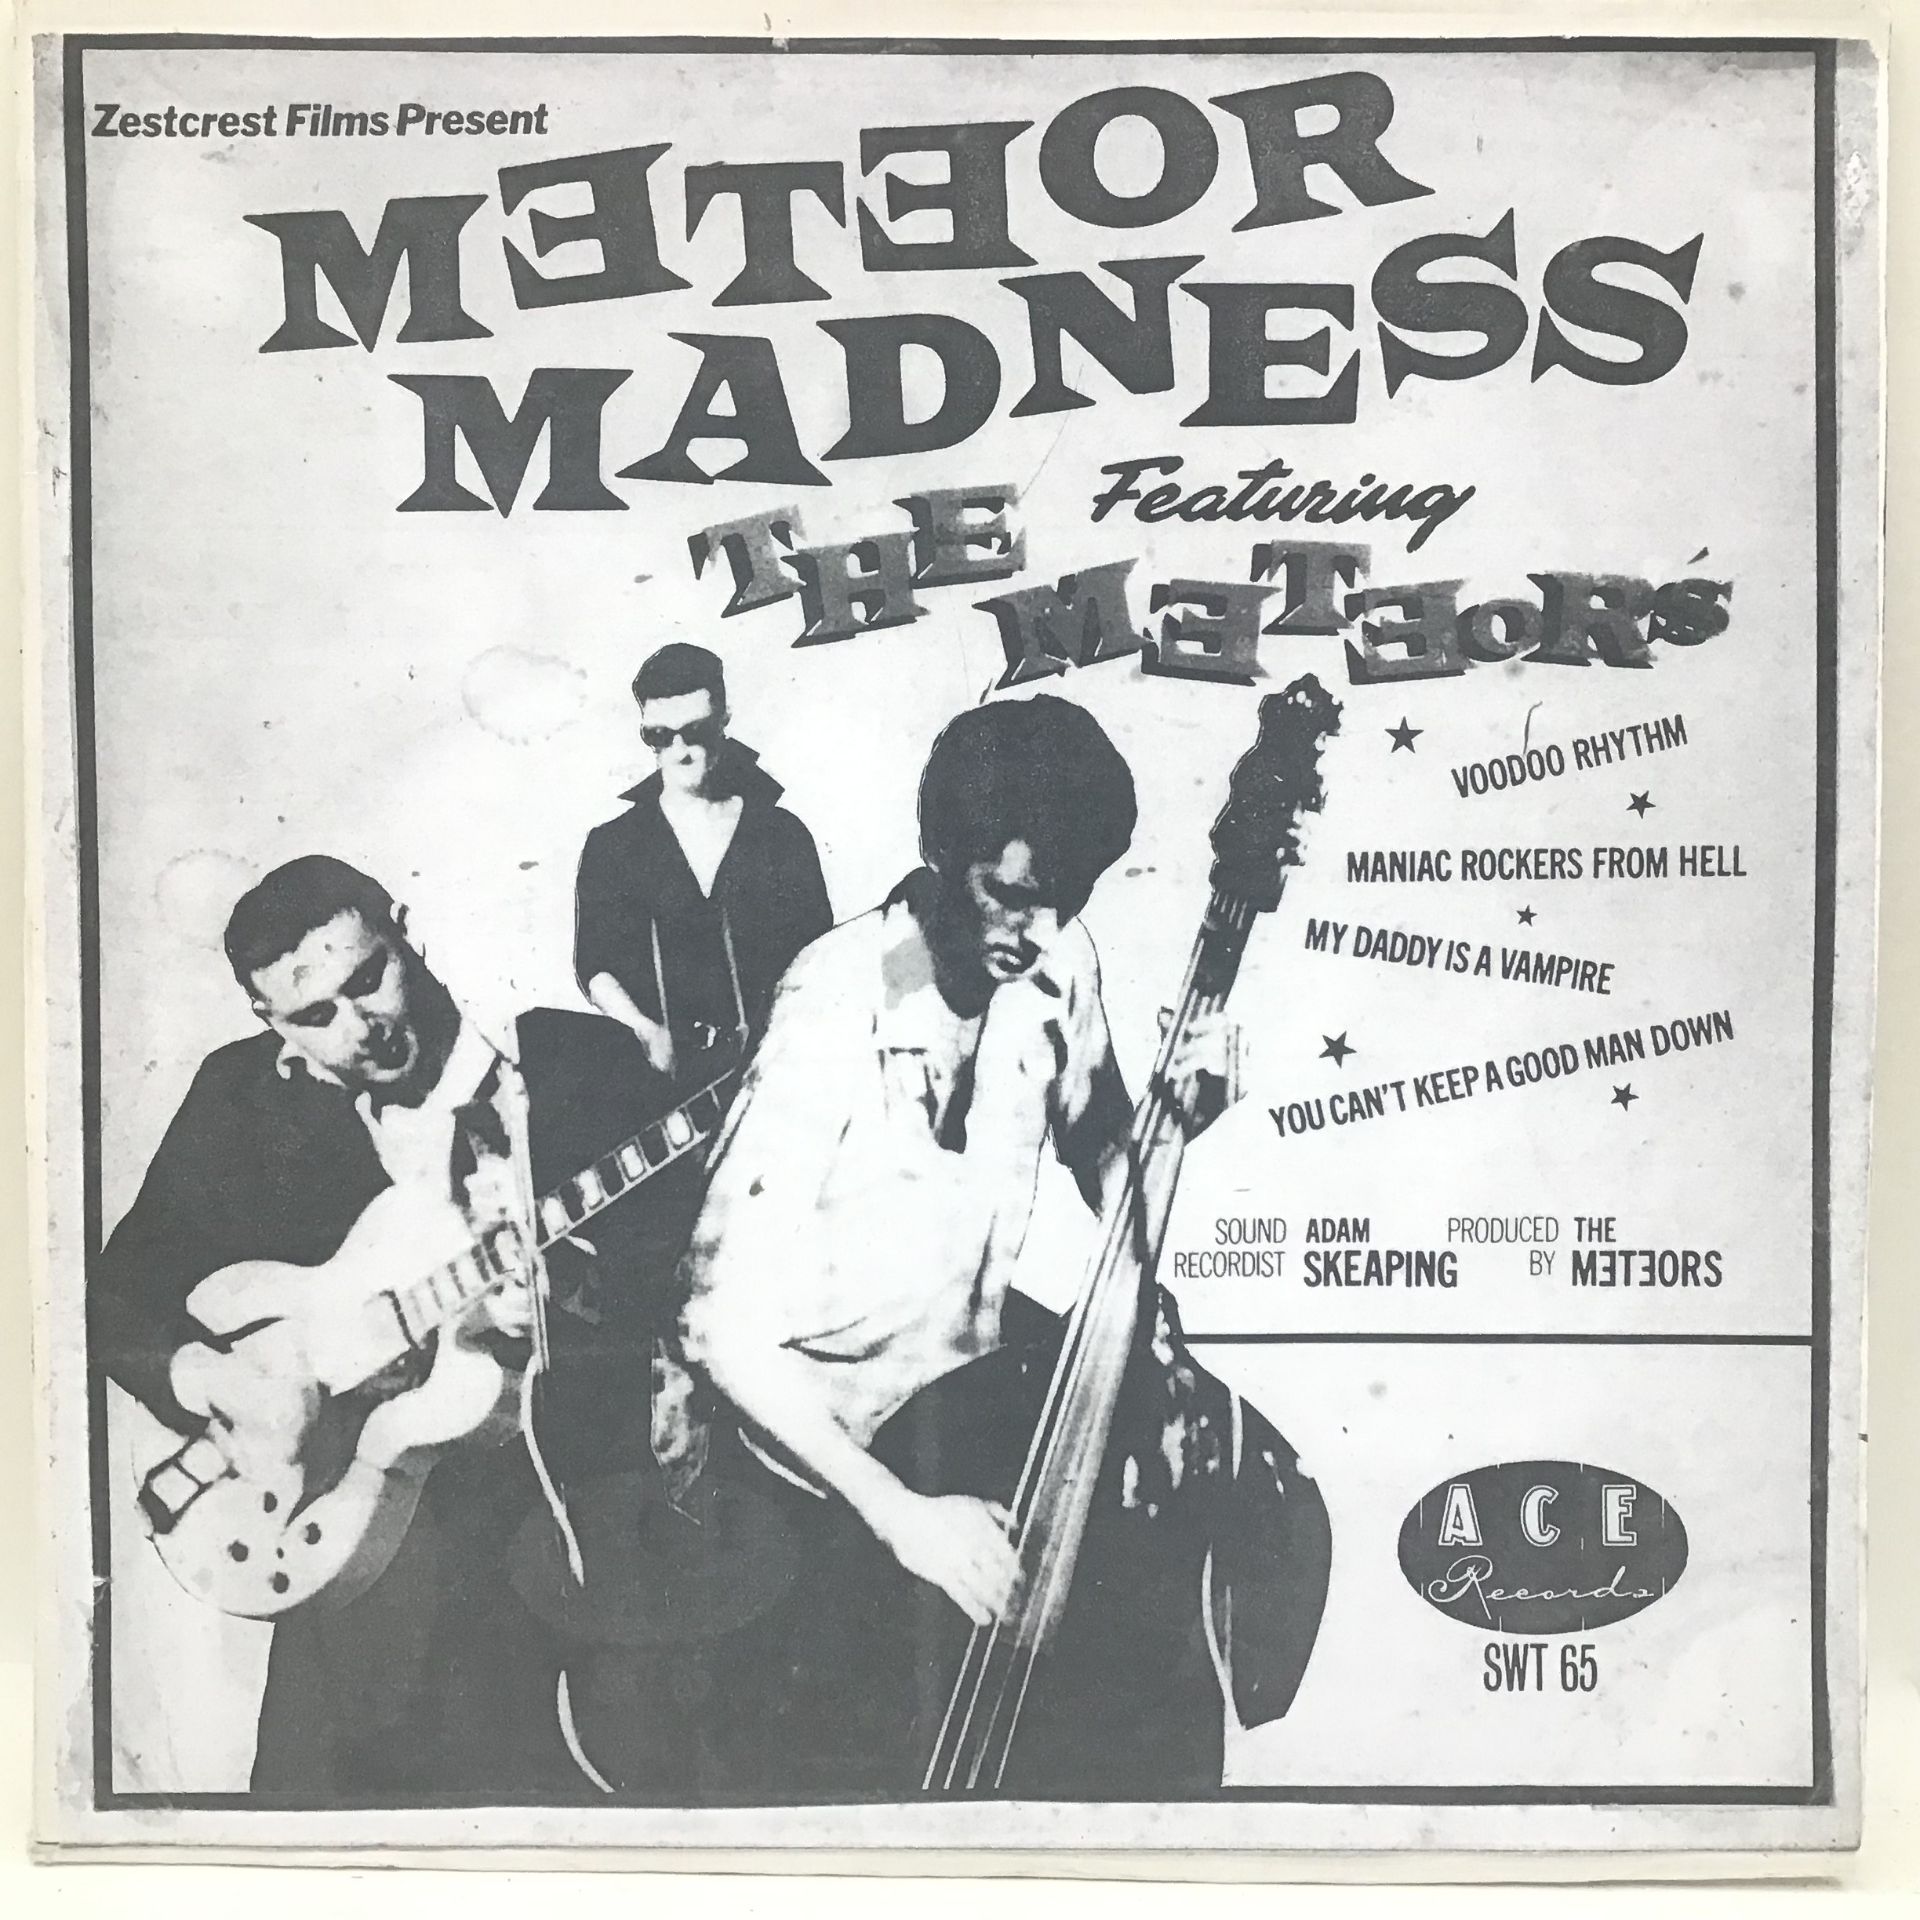 METEOR MADNESS / THE METEORS 10" WHITE LABEL. I'm sure if you're looking at this you know exactly